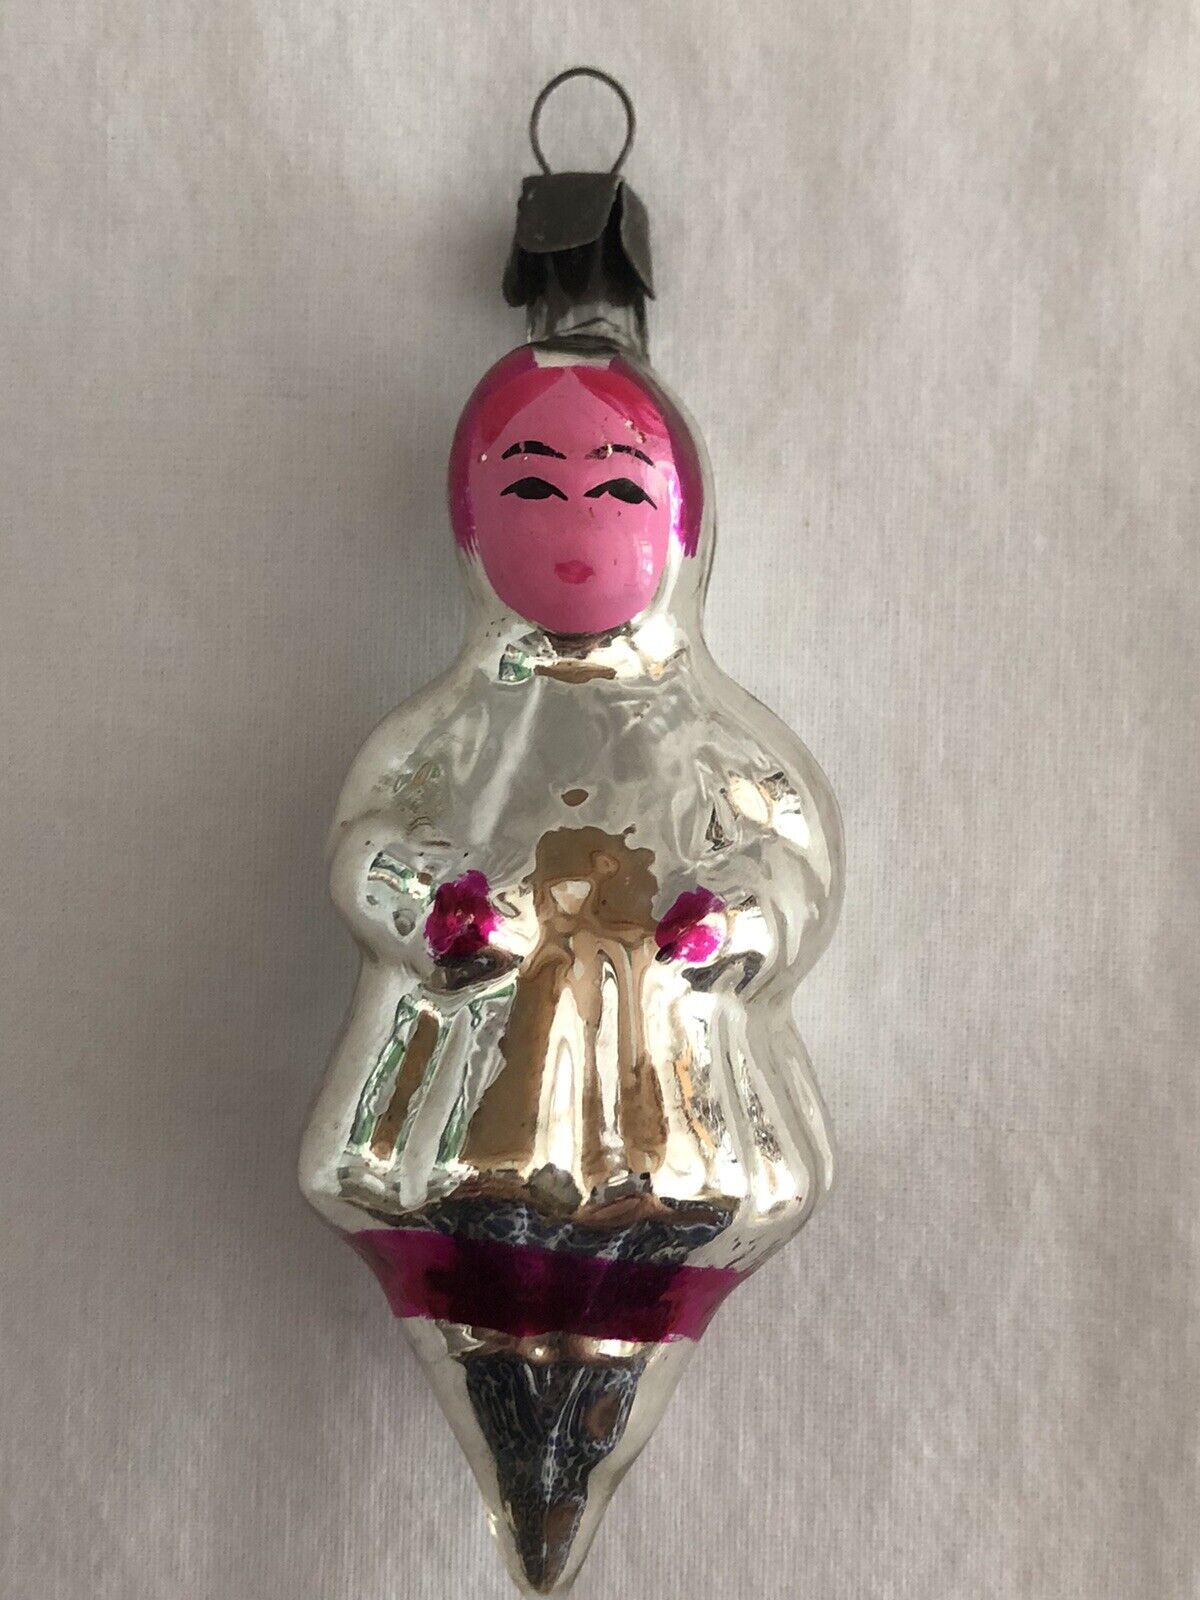 Antique vintage Russian HAND BLOWN GLASS Christmas ornament girl